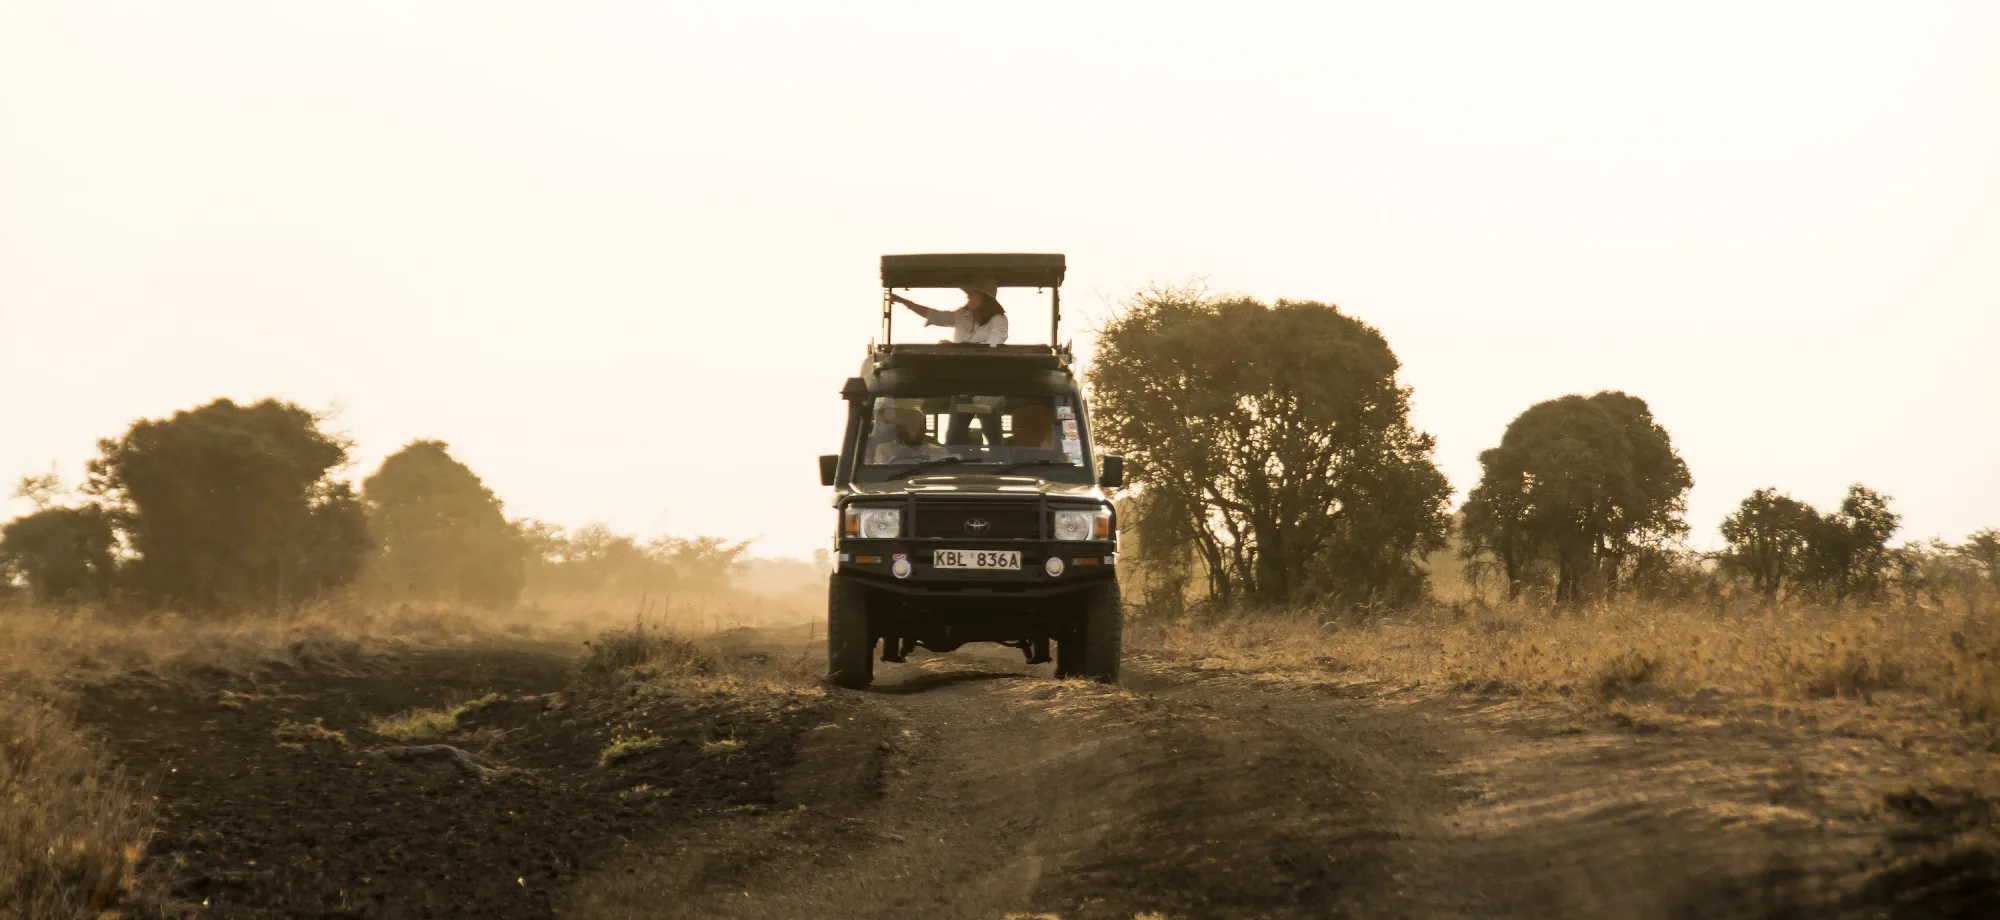 A safari vehicle is driving through the dusty African bush.